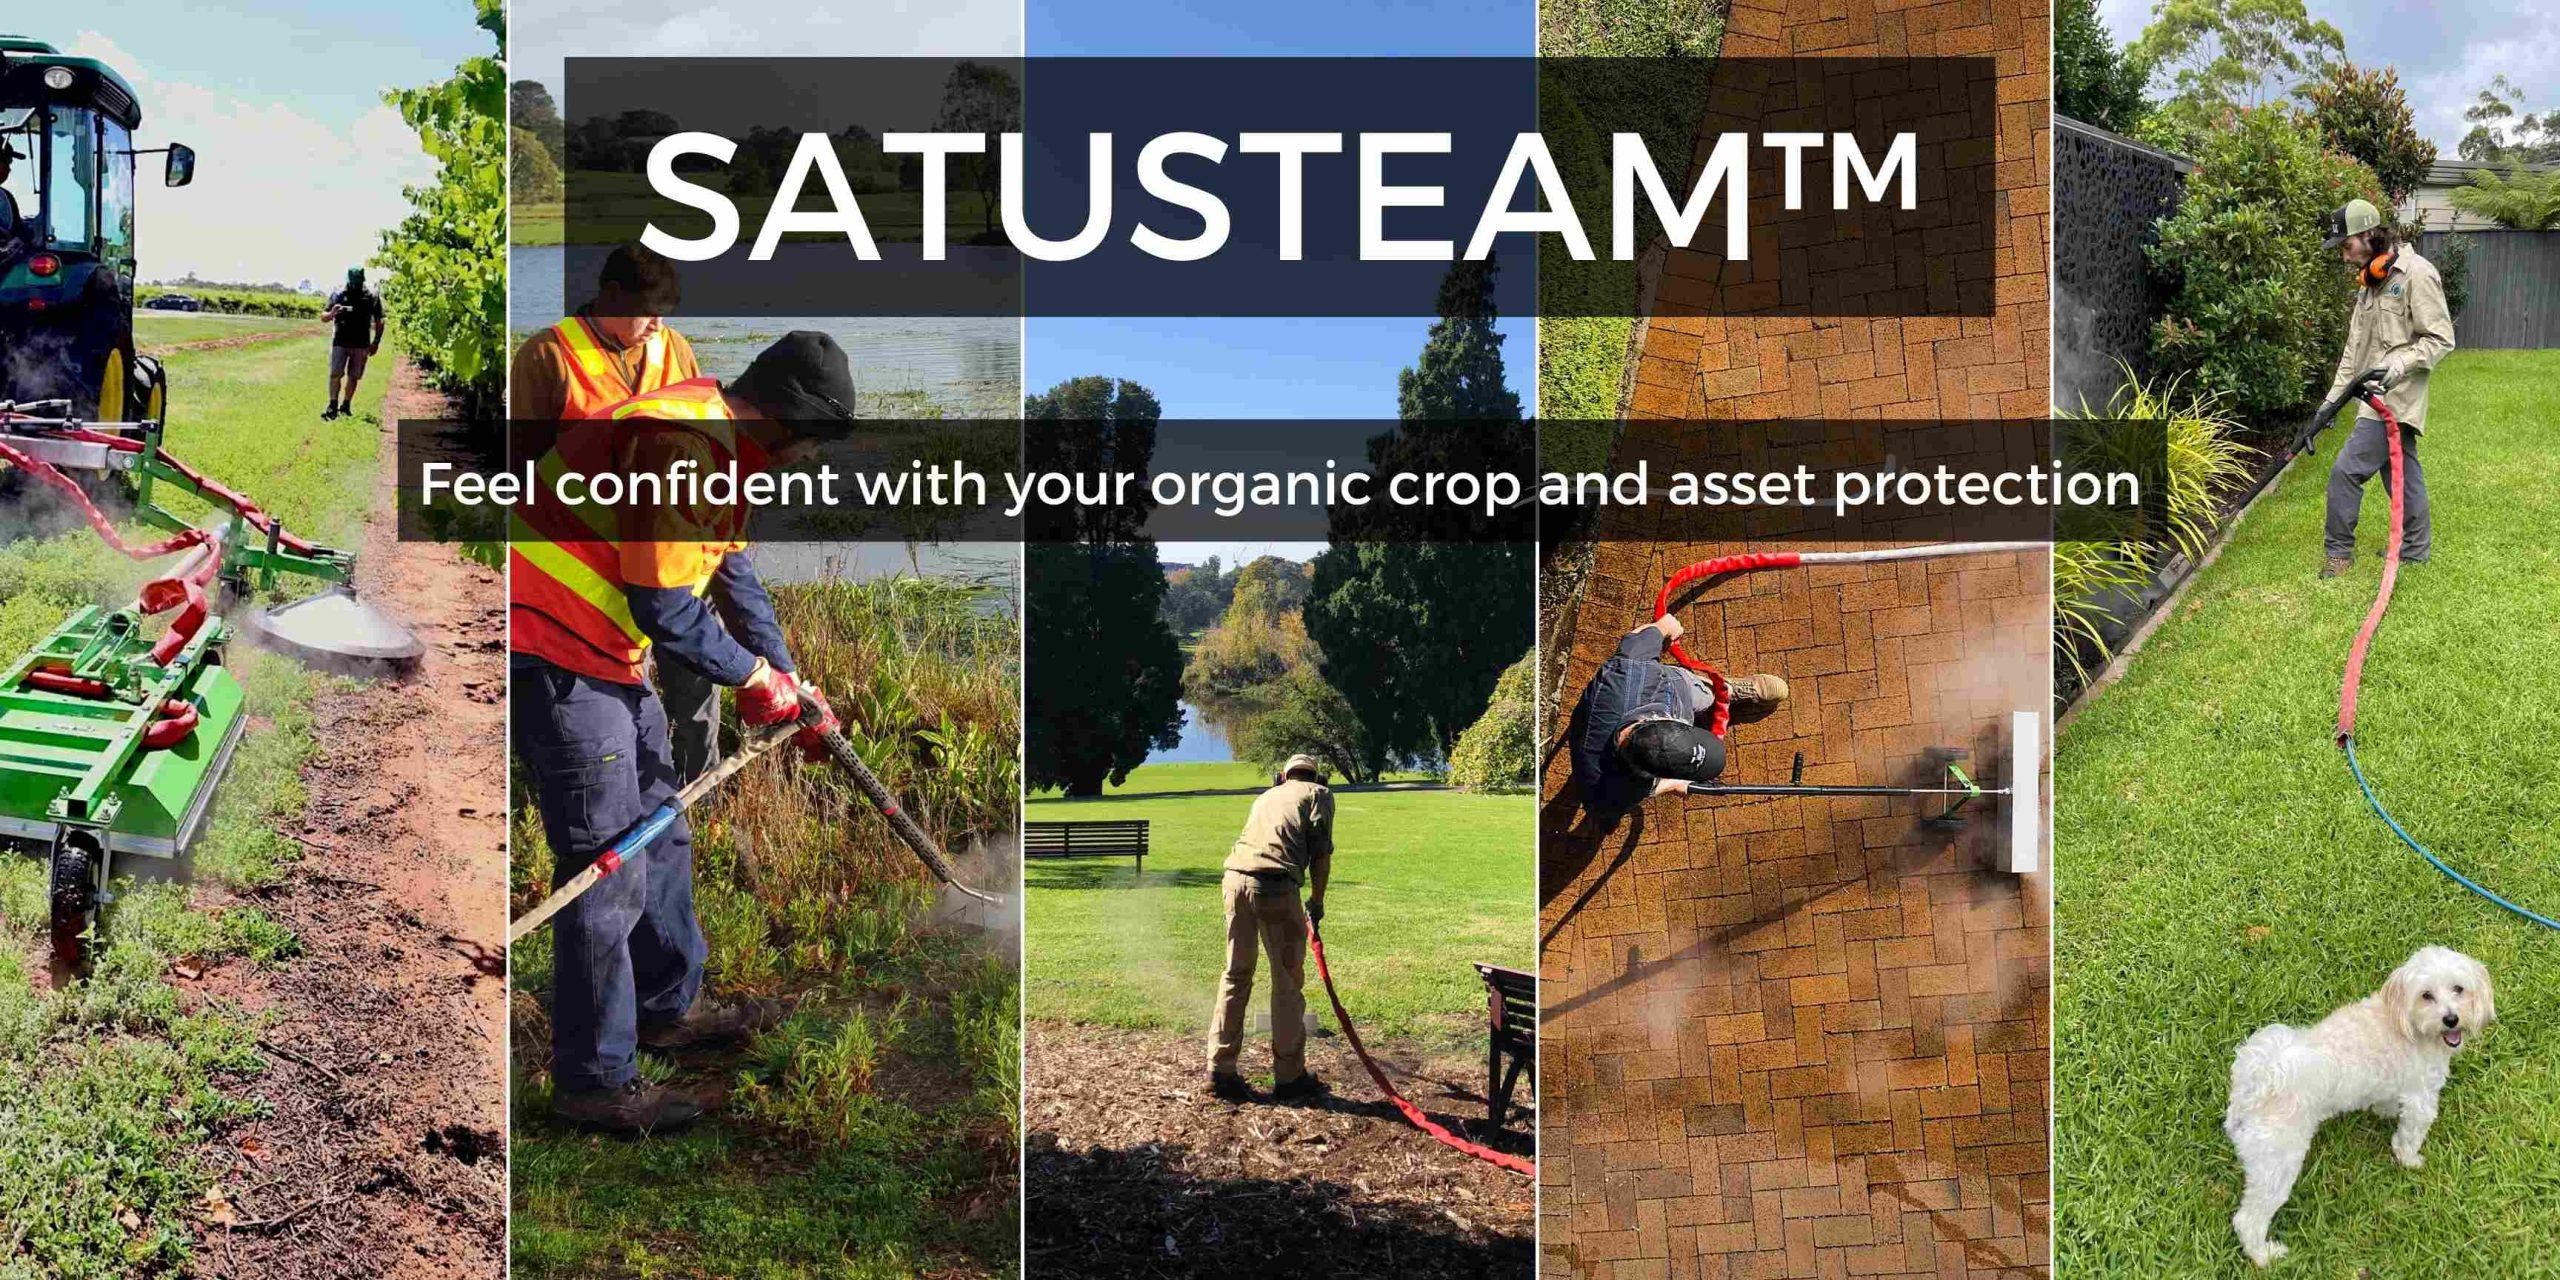 "SatusteamTM weed control technology by Weedtechnics: A chemical-free, eco-friendly solution using high-temperature steam for effective weed management."